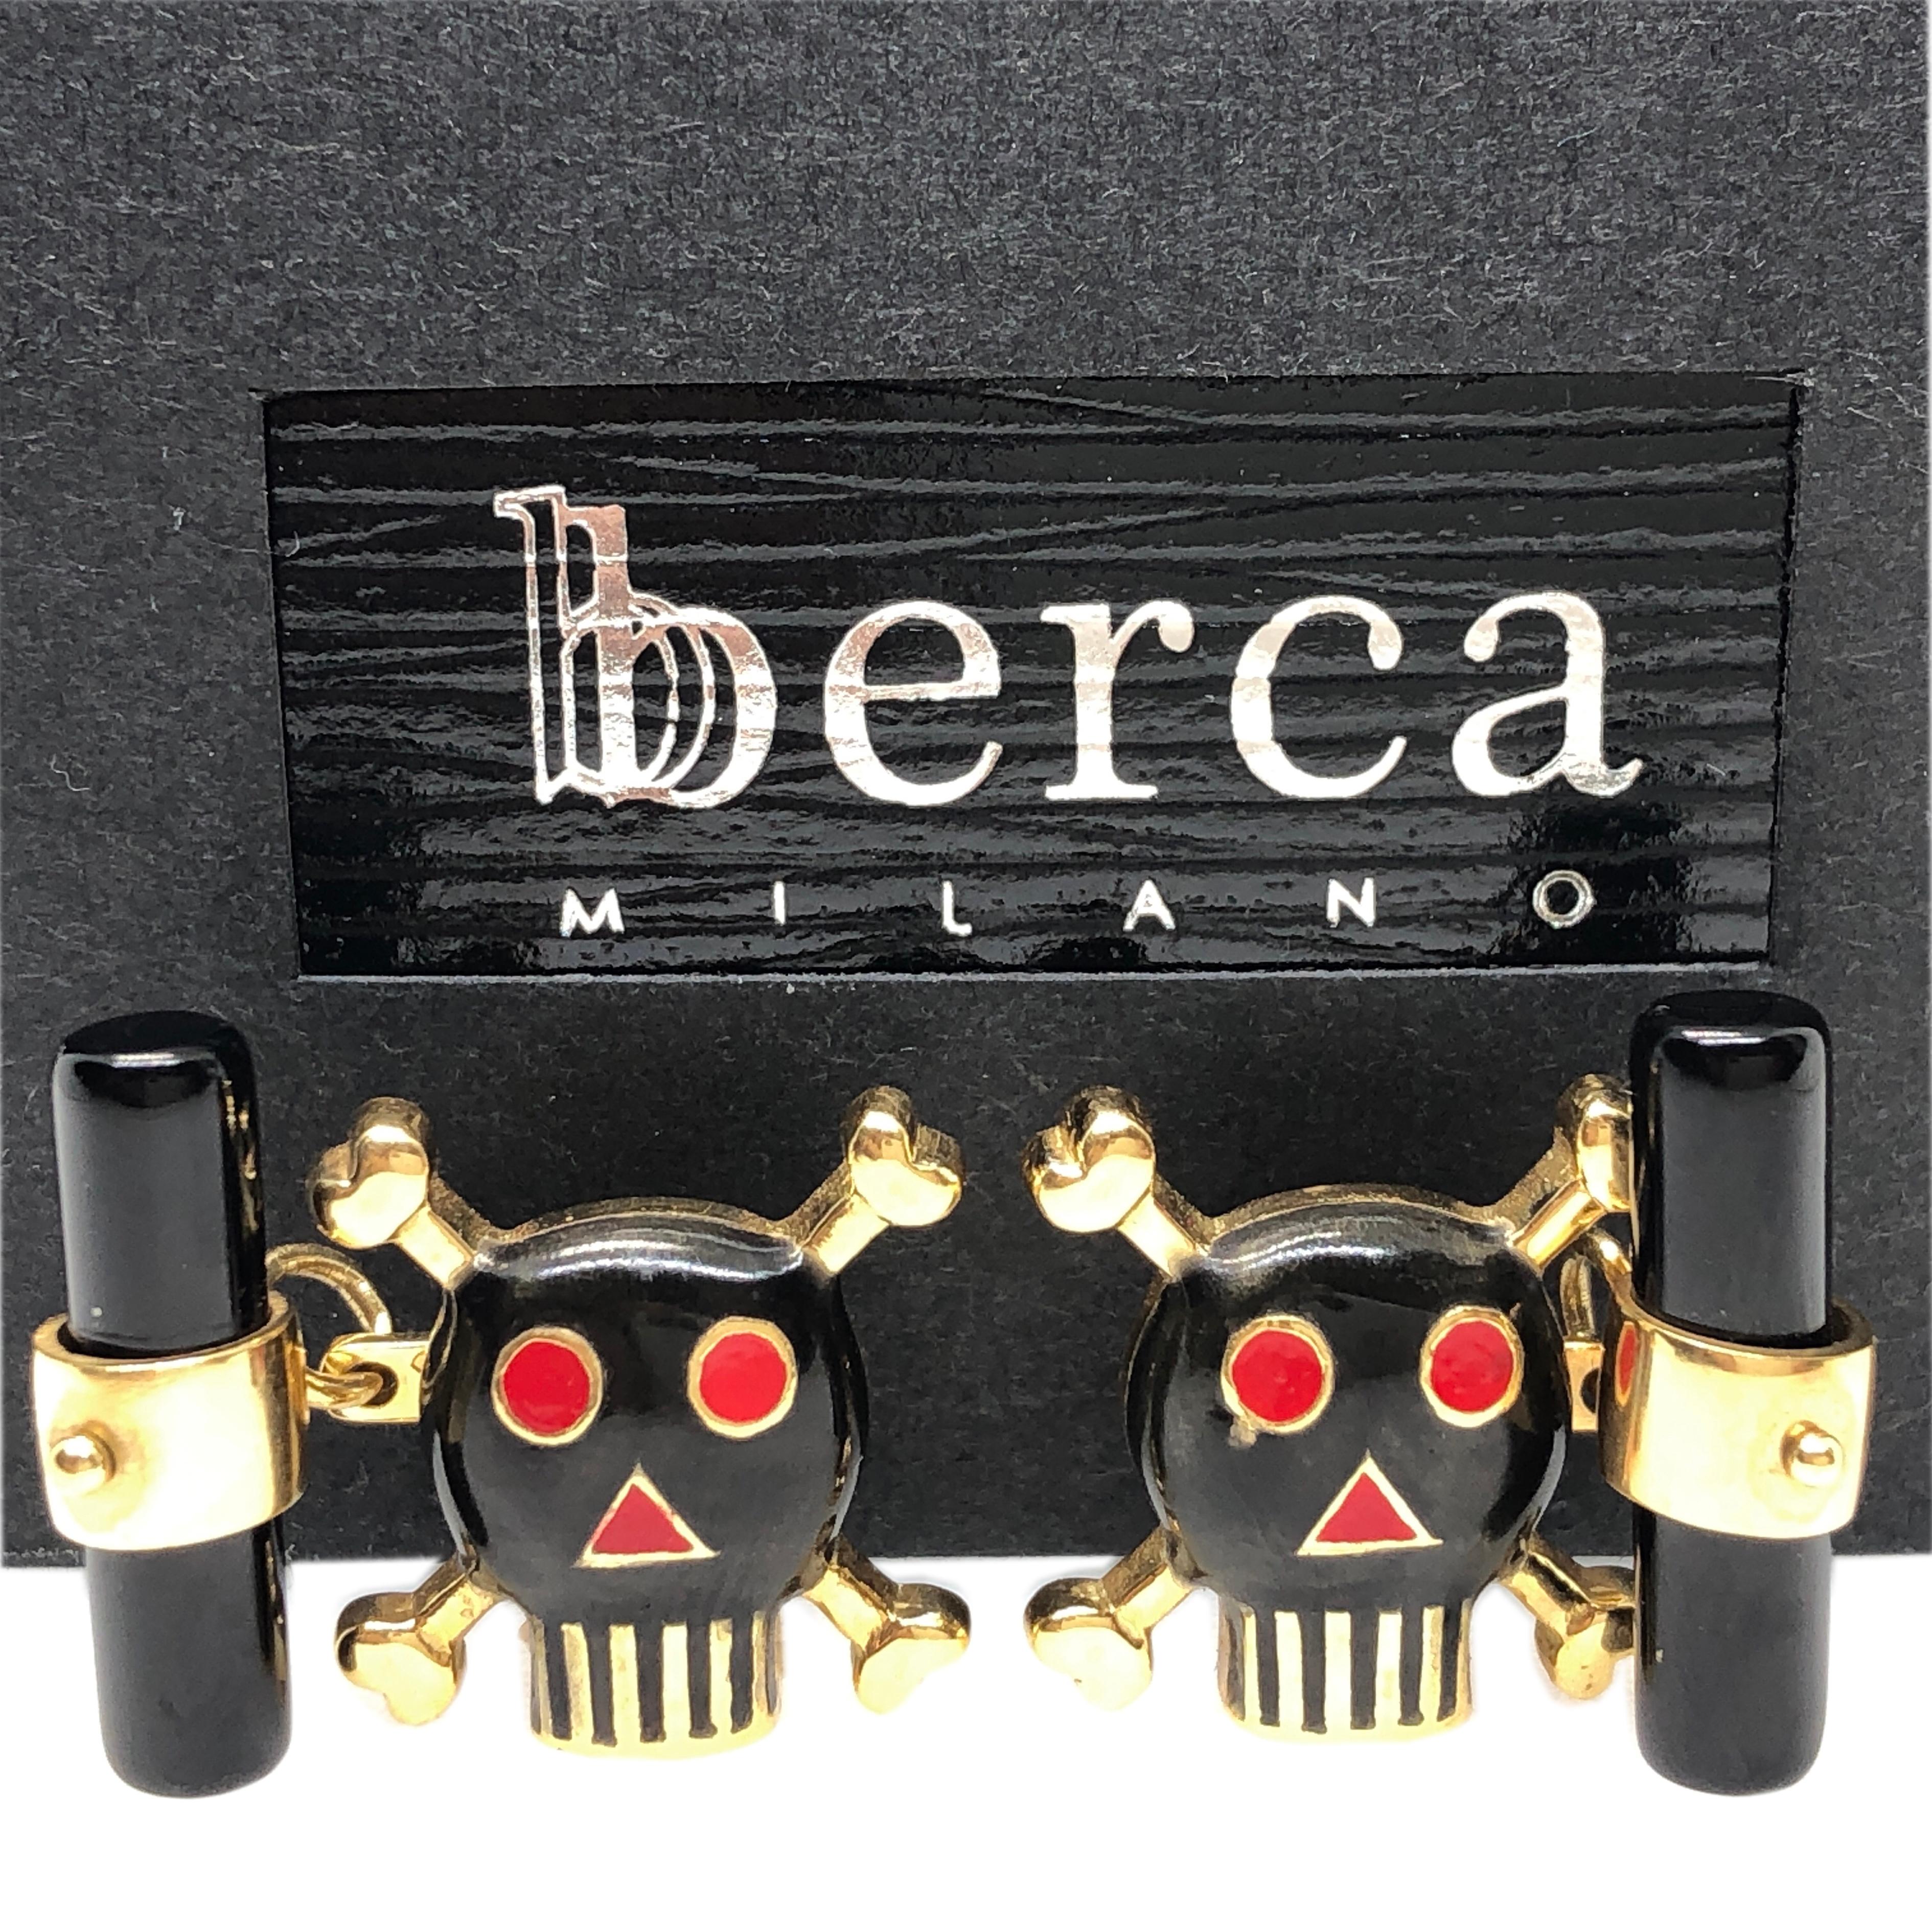 Unique yet Chic, Red and Black Hand Enamelled Little Skull Shaped Cufflinks, Hand Inlaid Onyx Baton Back, 18Carat yellow gold setting.
In our smart Black Box and Pouch. 